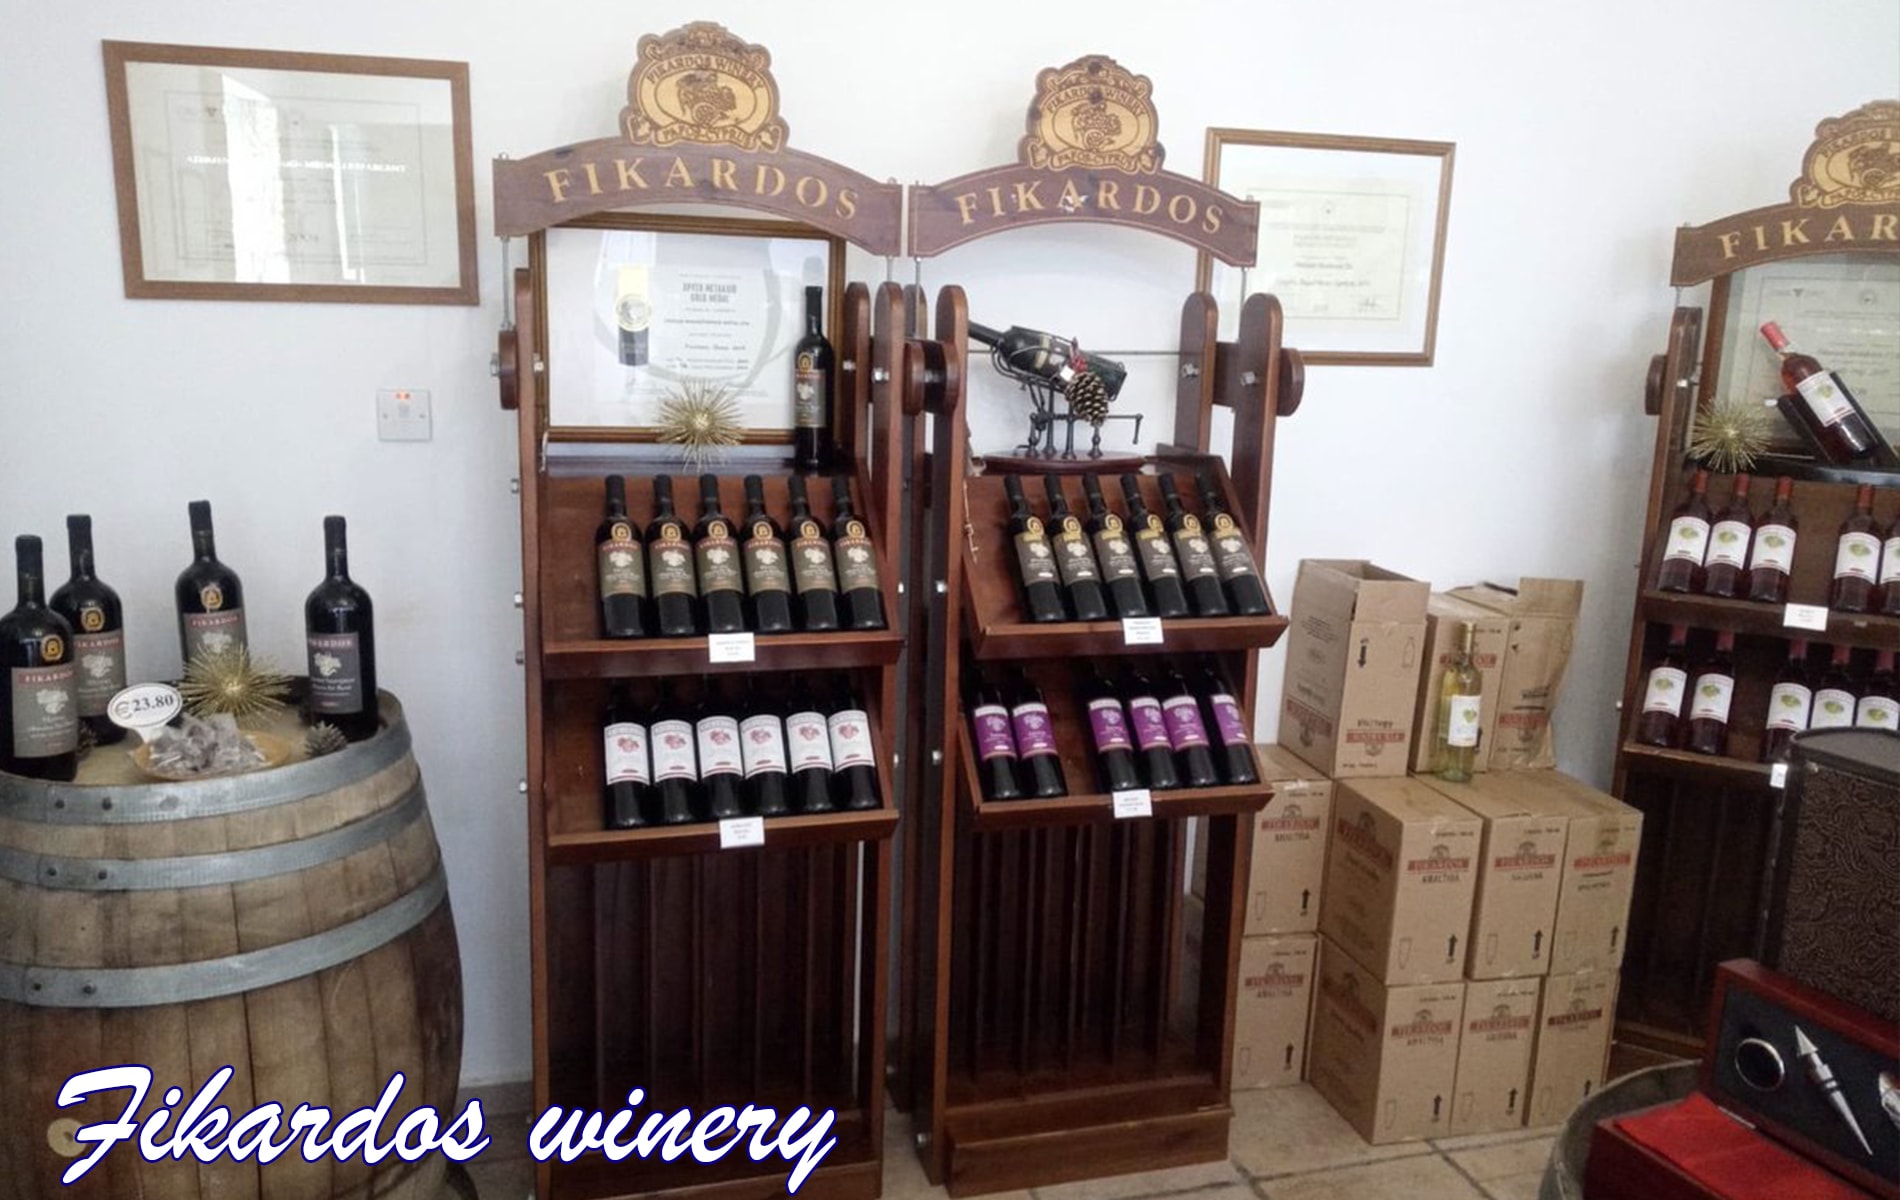 Fikardos winery tour in a taxi from Paphos airport